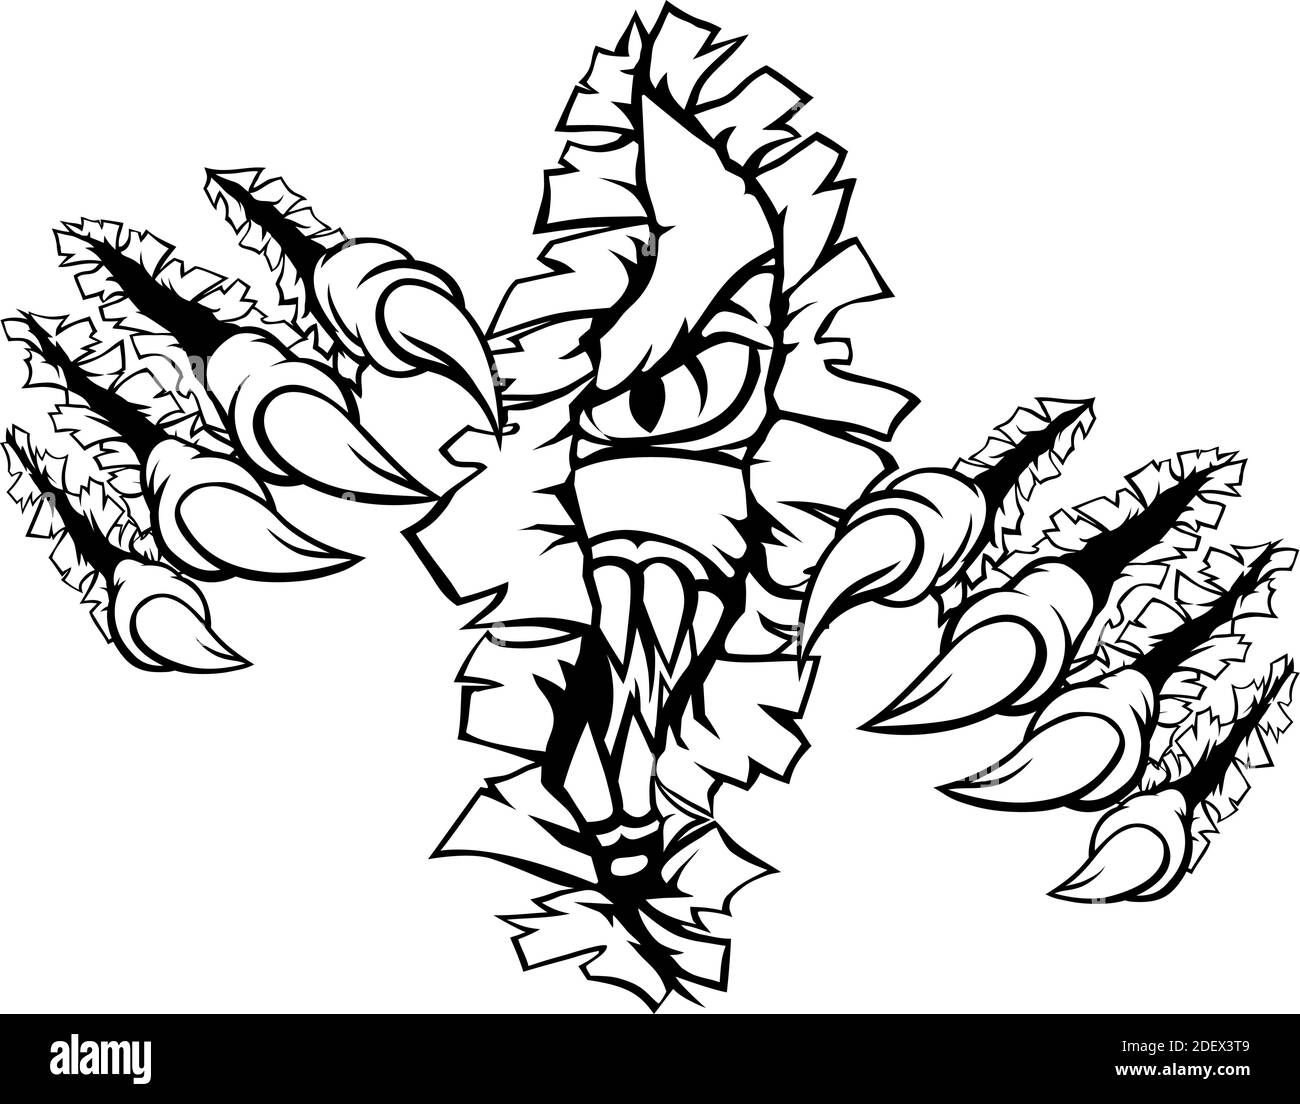 Monster With Talon Claw Tearing A Rip Through Wall Stock Vector